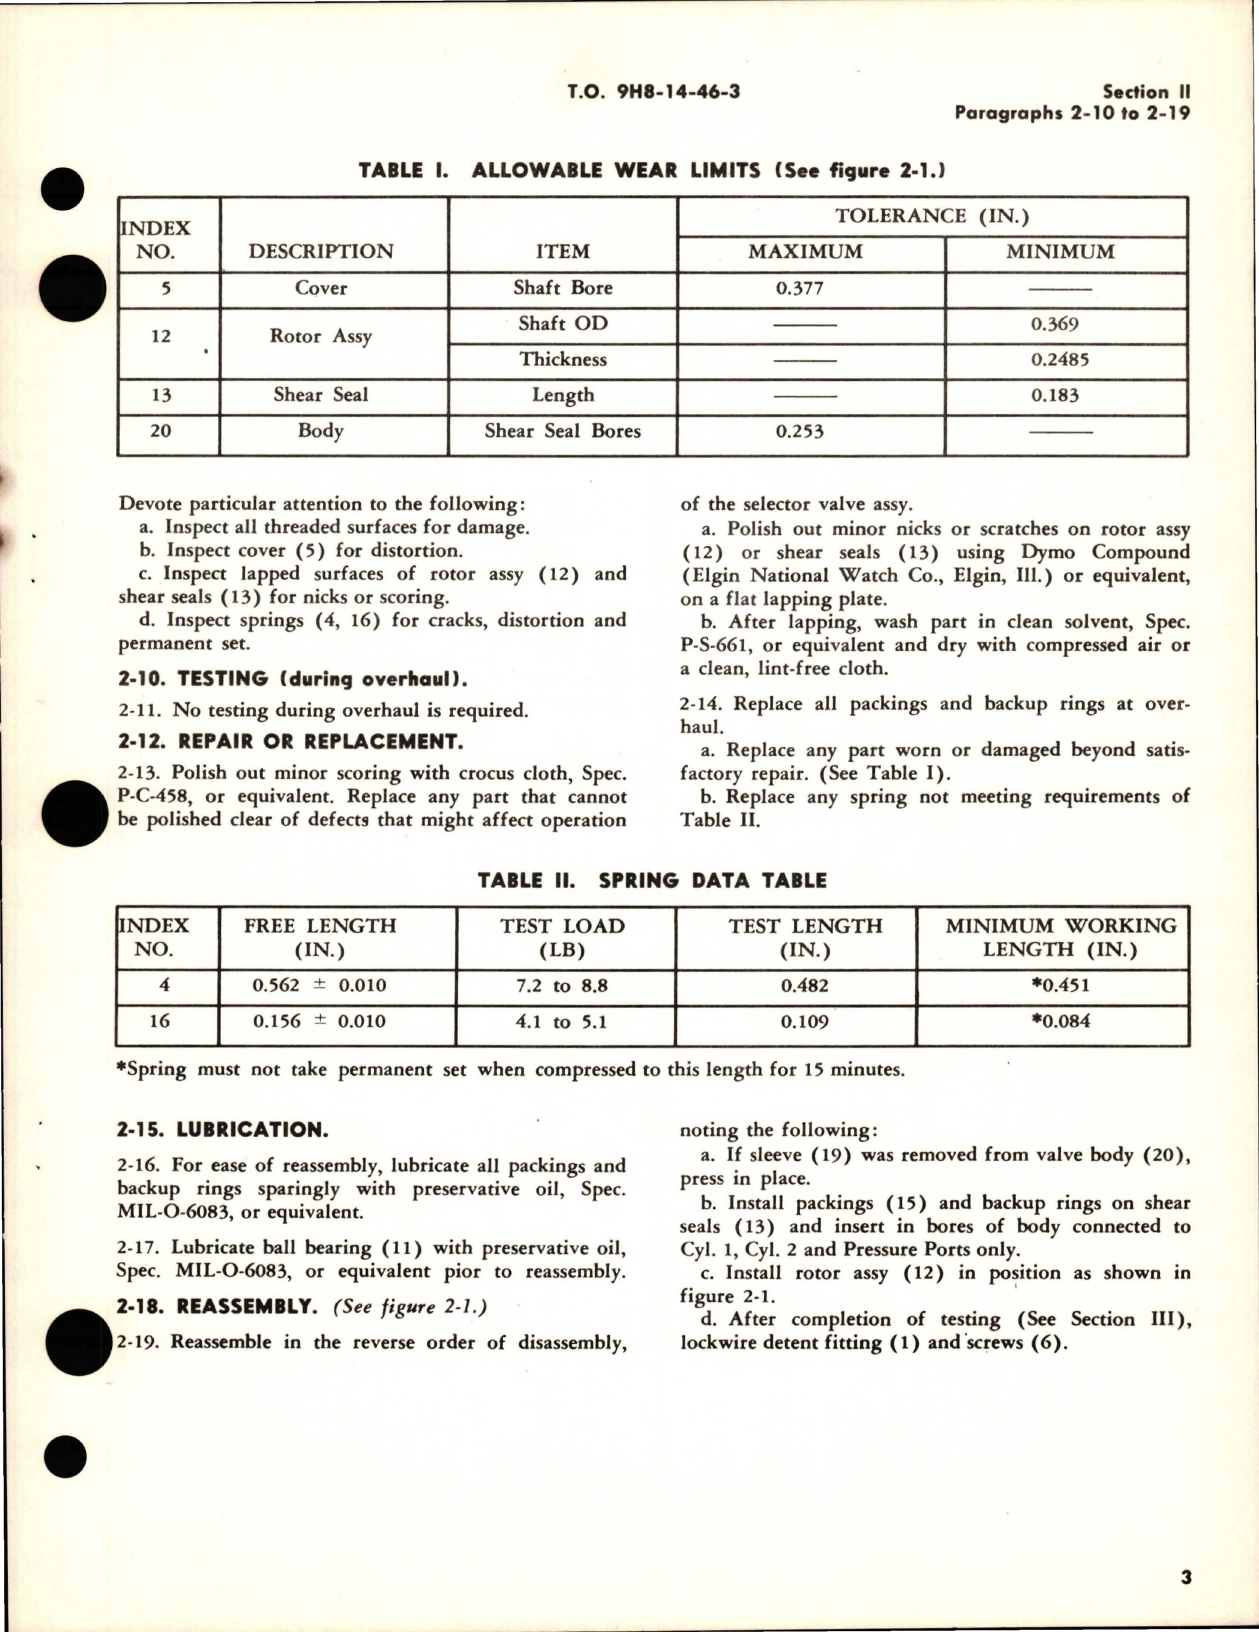 Sample page 5 from AirCorps Library document: Overhaul Instructions for Manually Operated Selector Valves